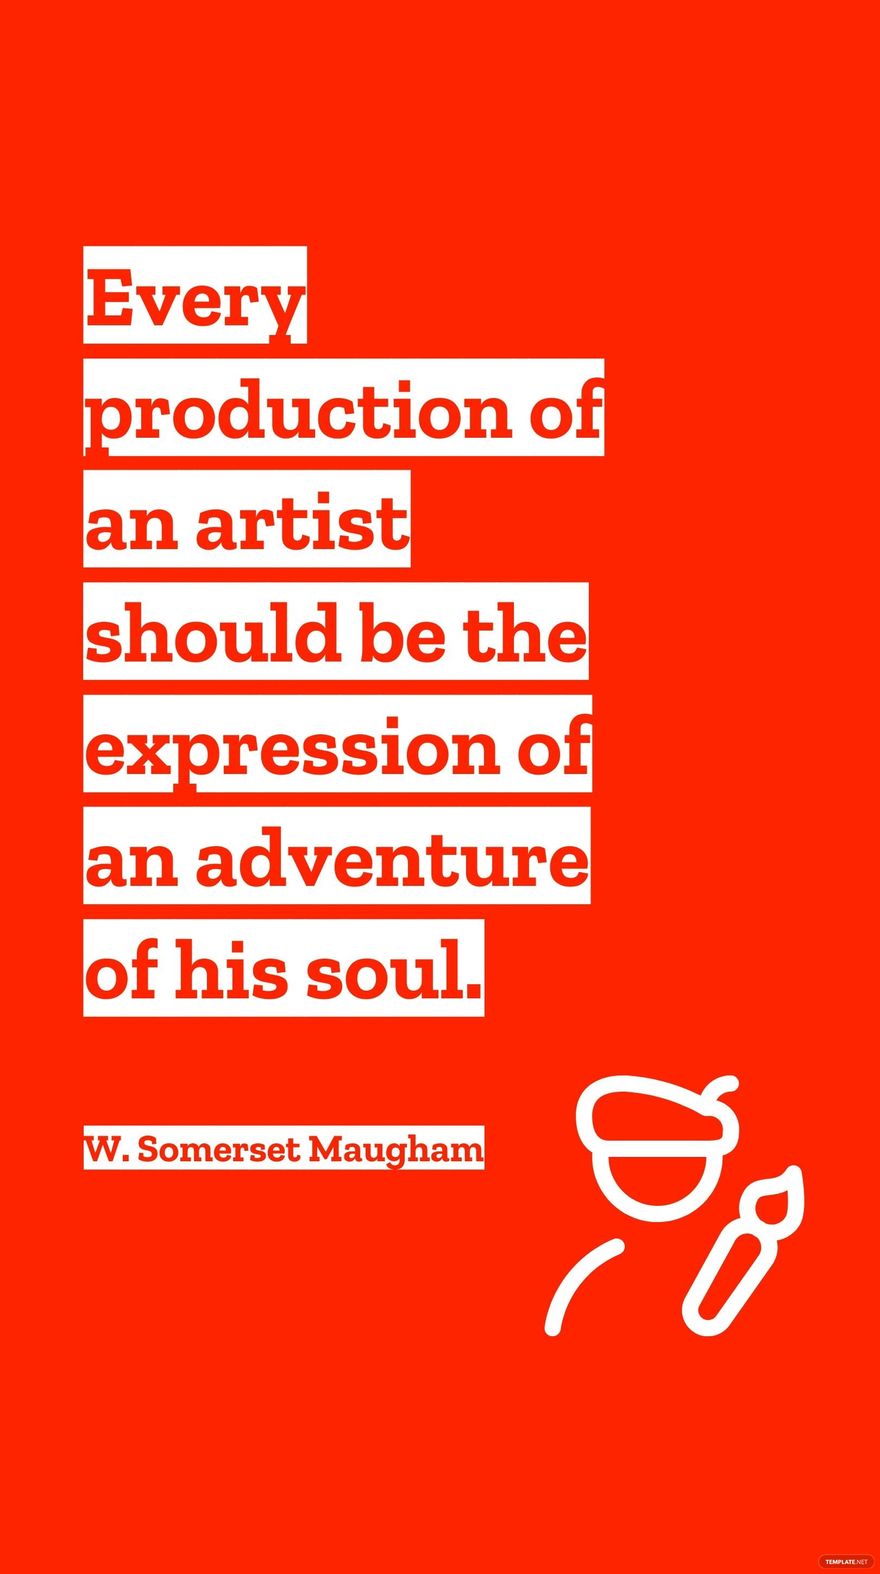 Free W. Somerset Maugham - Every production of an artist should be the expression of an adventure of his soul. in JPG